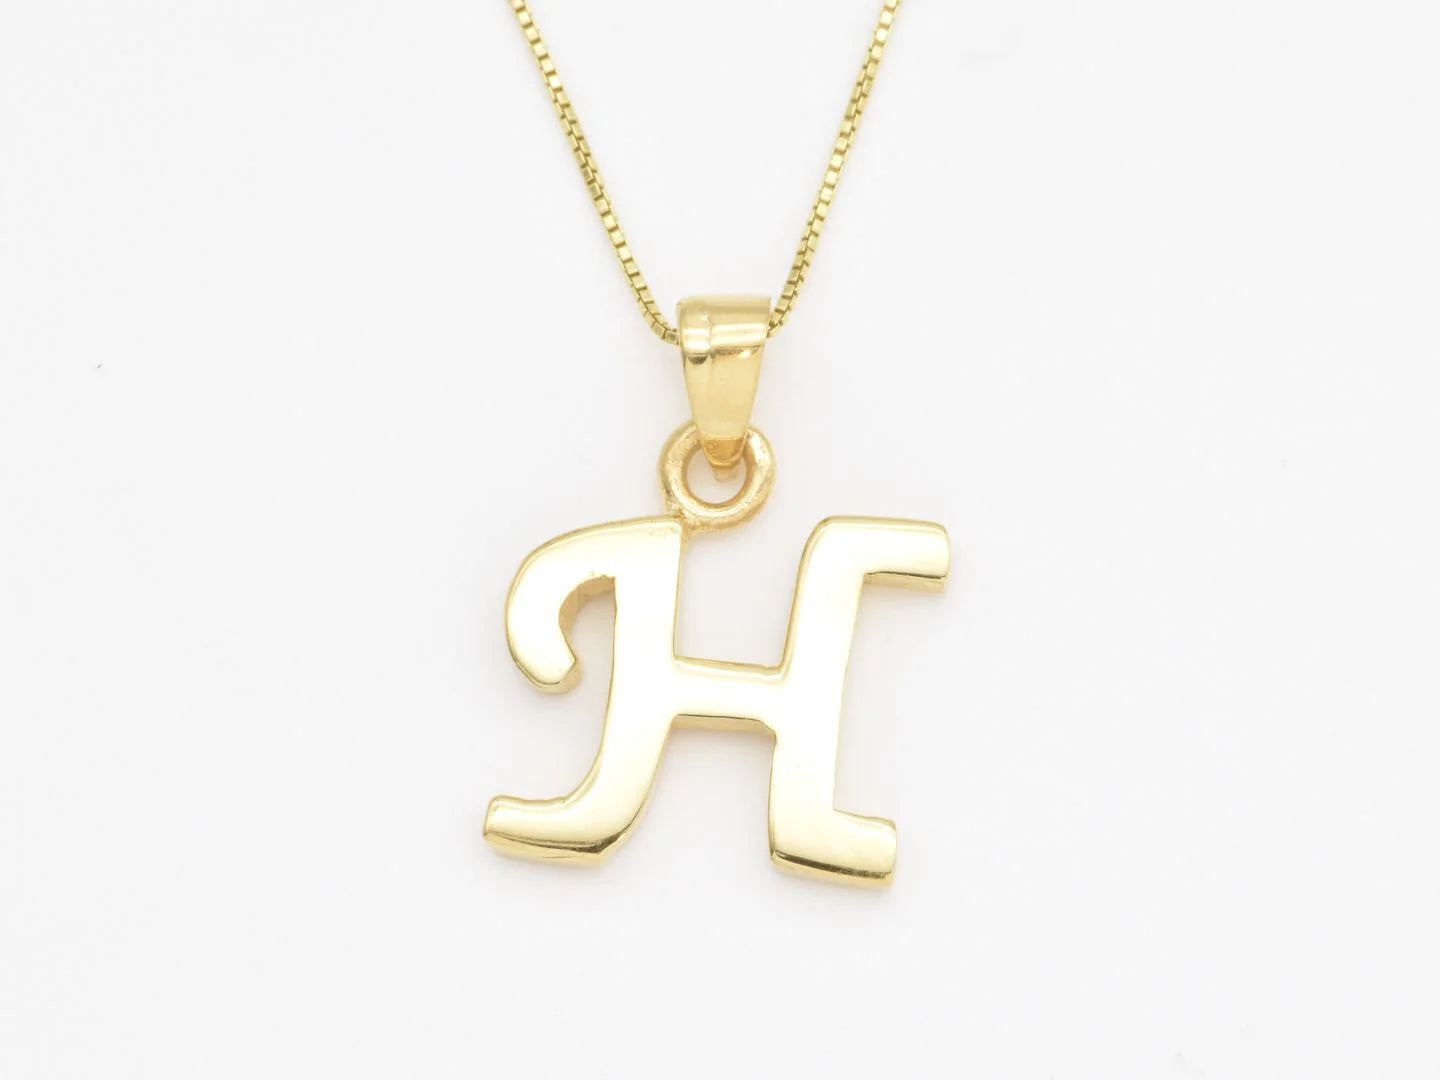 Gold Letter Pendant - Letter Collection, Gold Initial Pendant, Letter Pendant, Initial Pendant, Letter Necklace, Initial Necklace, Gift For Her